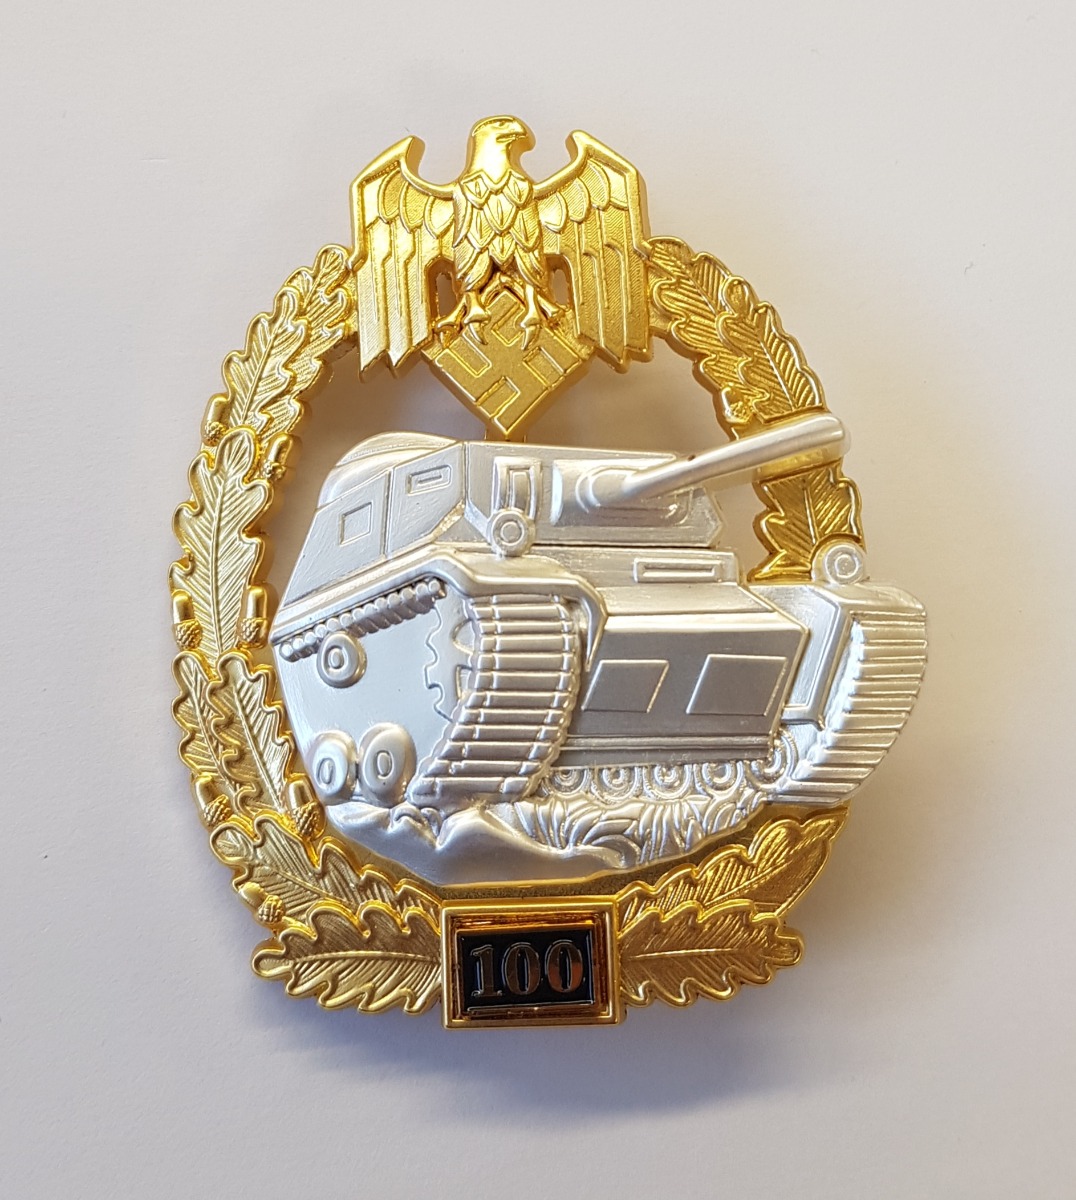 GERMAN TANK BATTLE BADGE 100 ACTIONS Gold & Silver